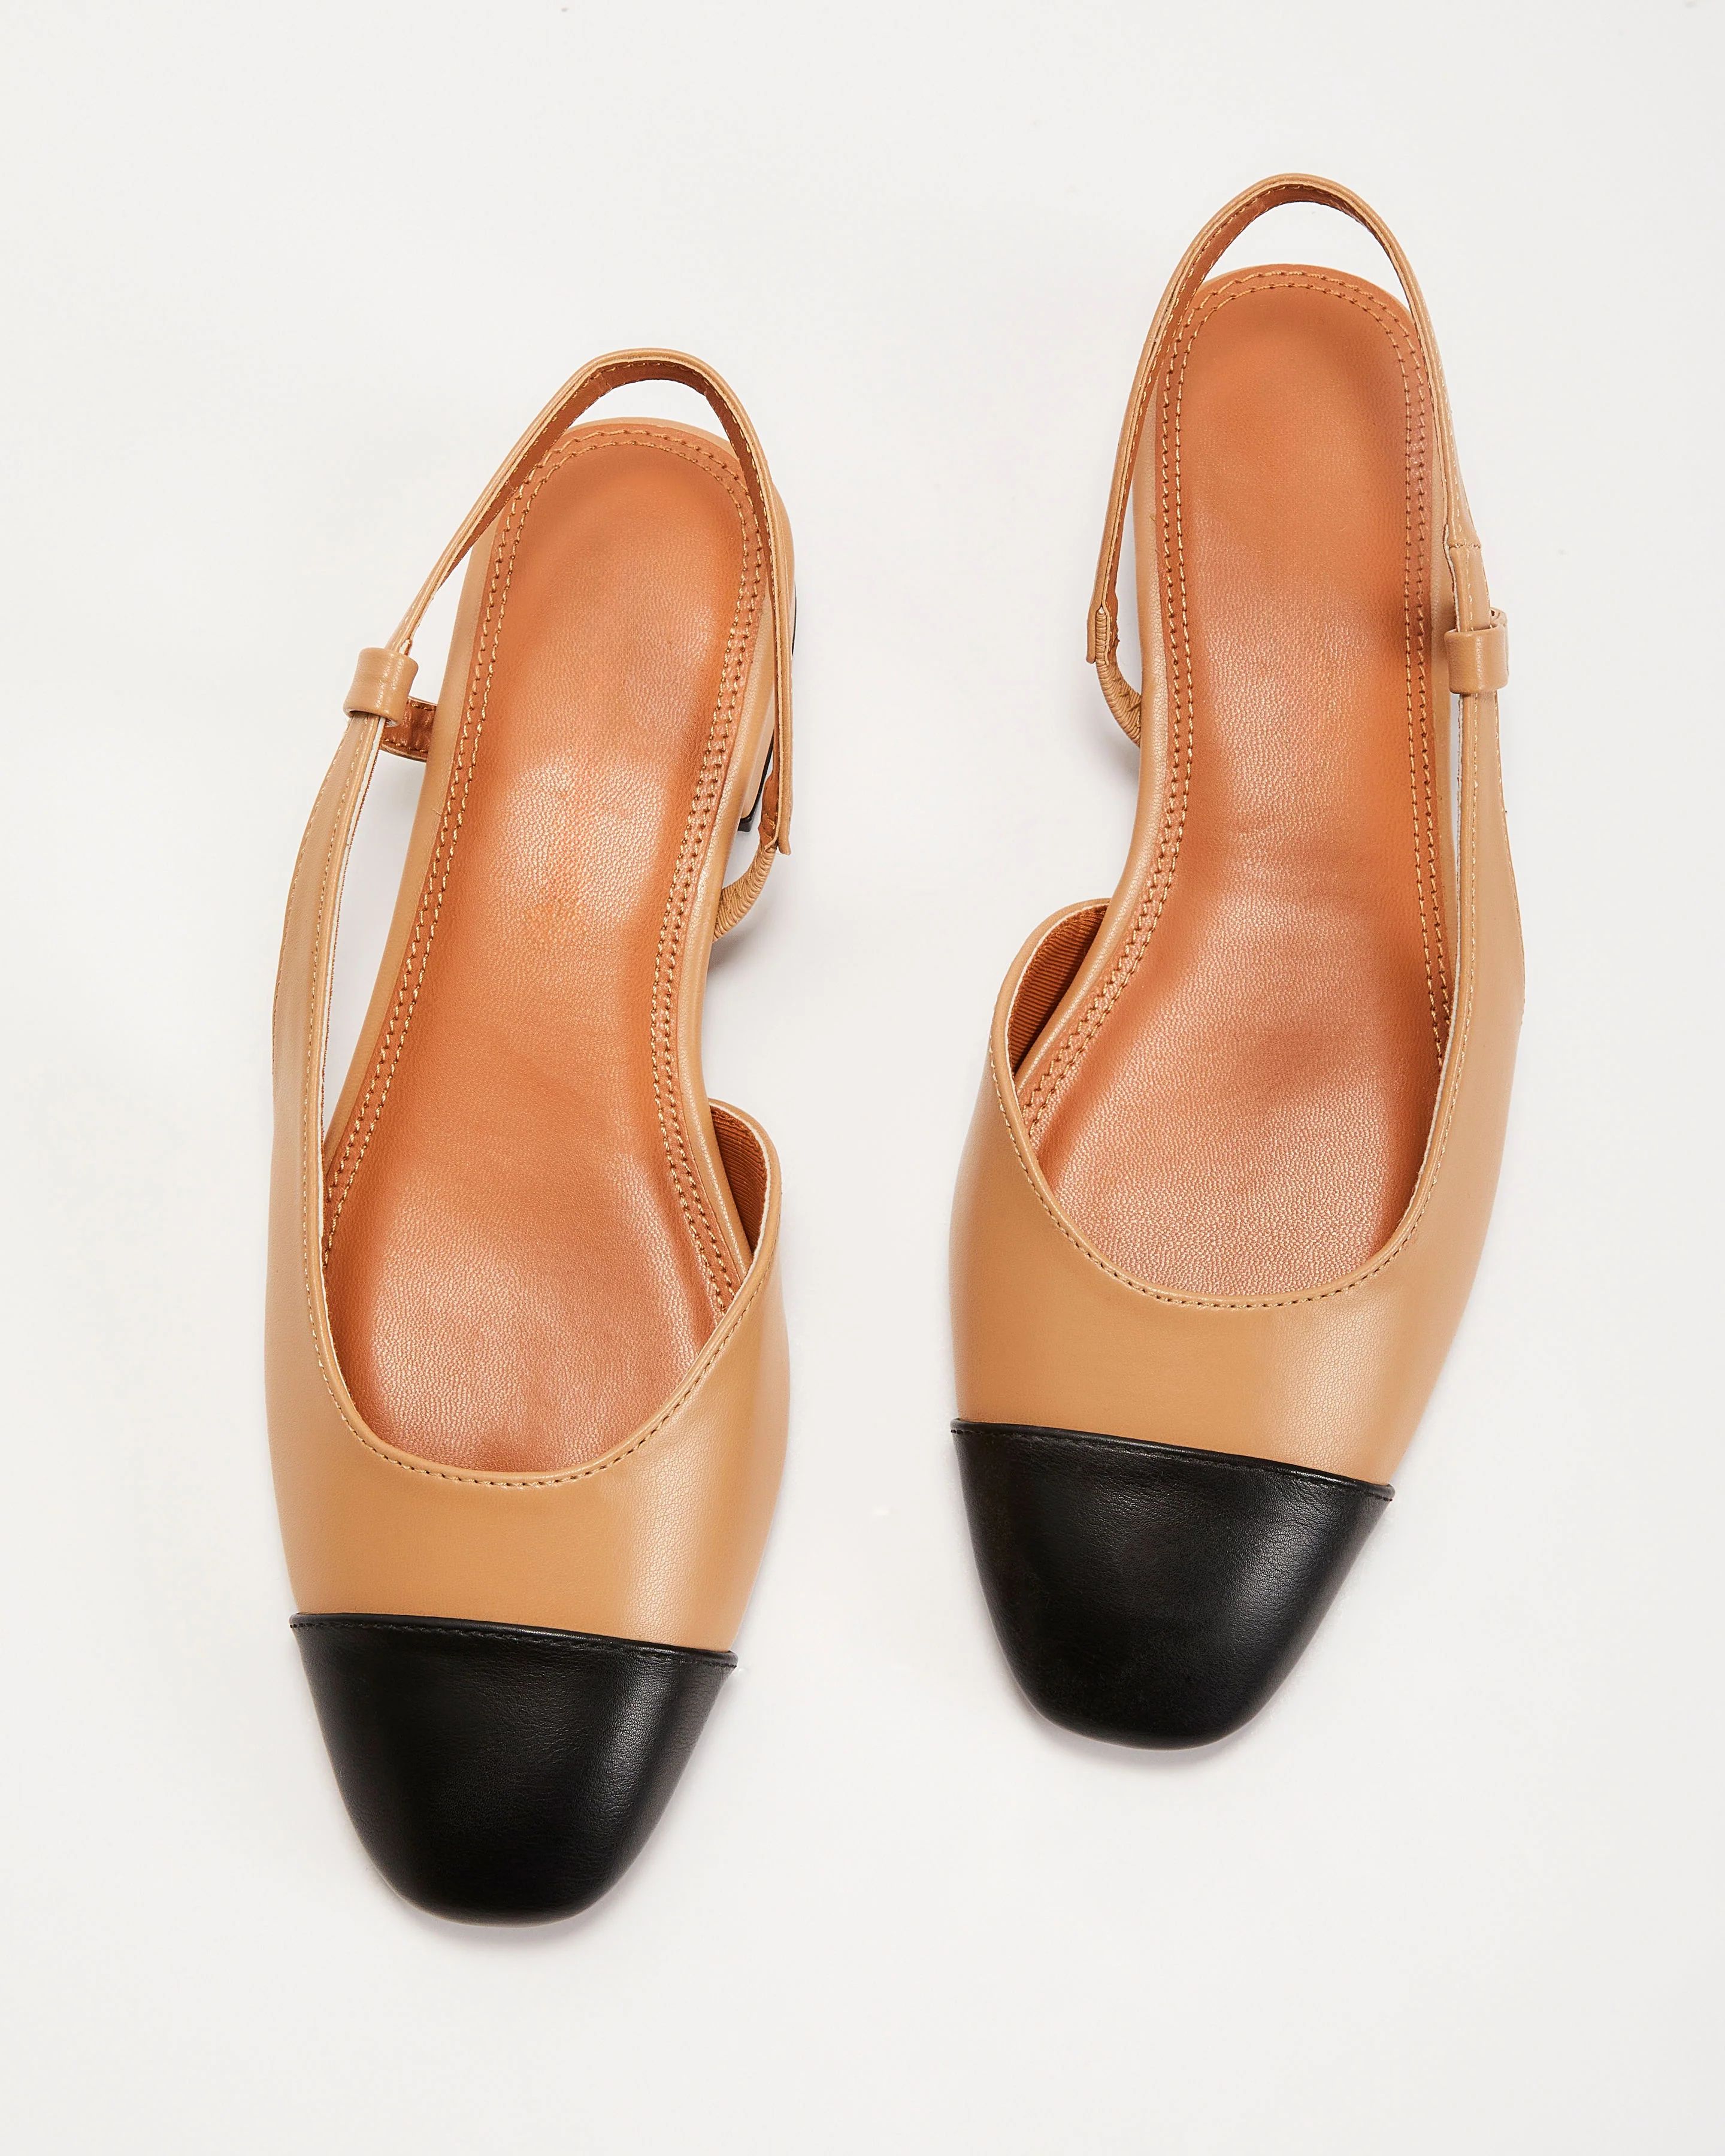 Coco Slingback Flats - Black Beige Combo | VICI Collection